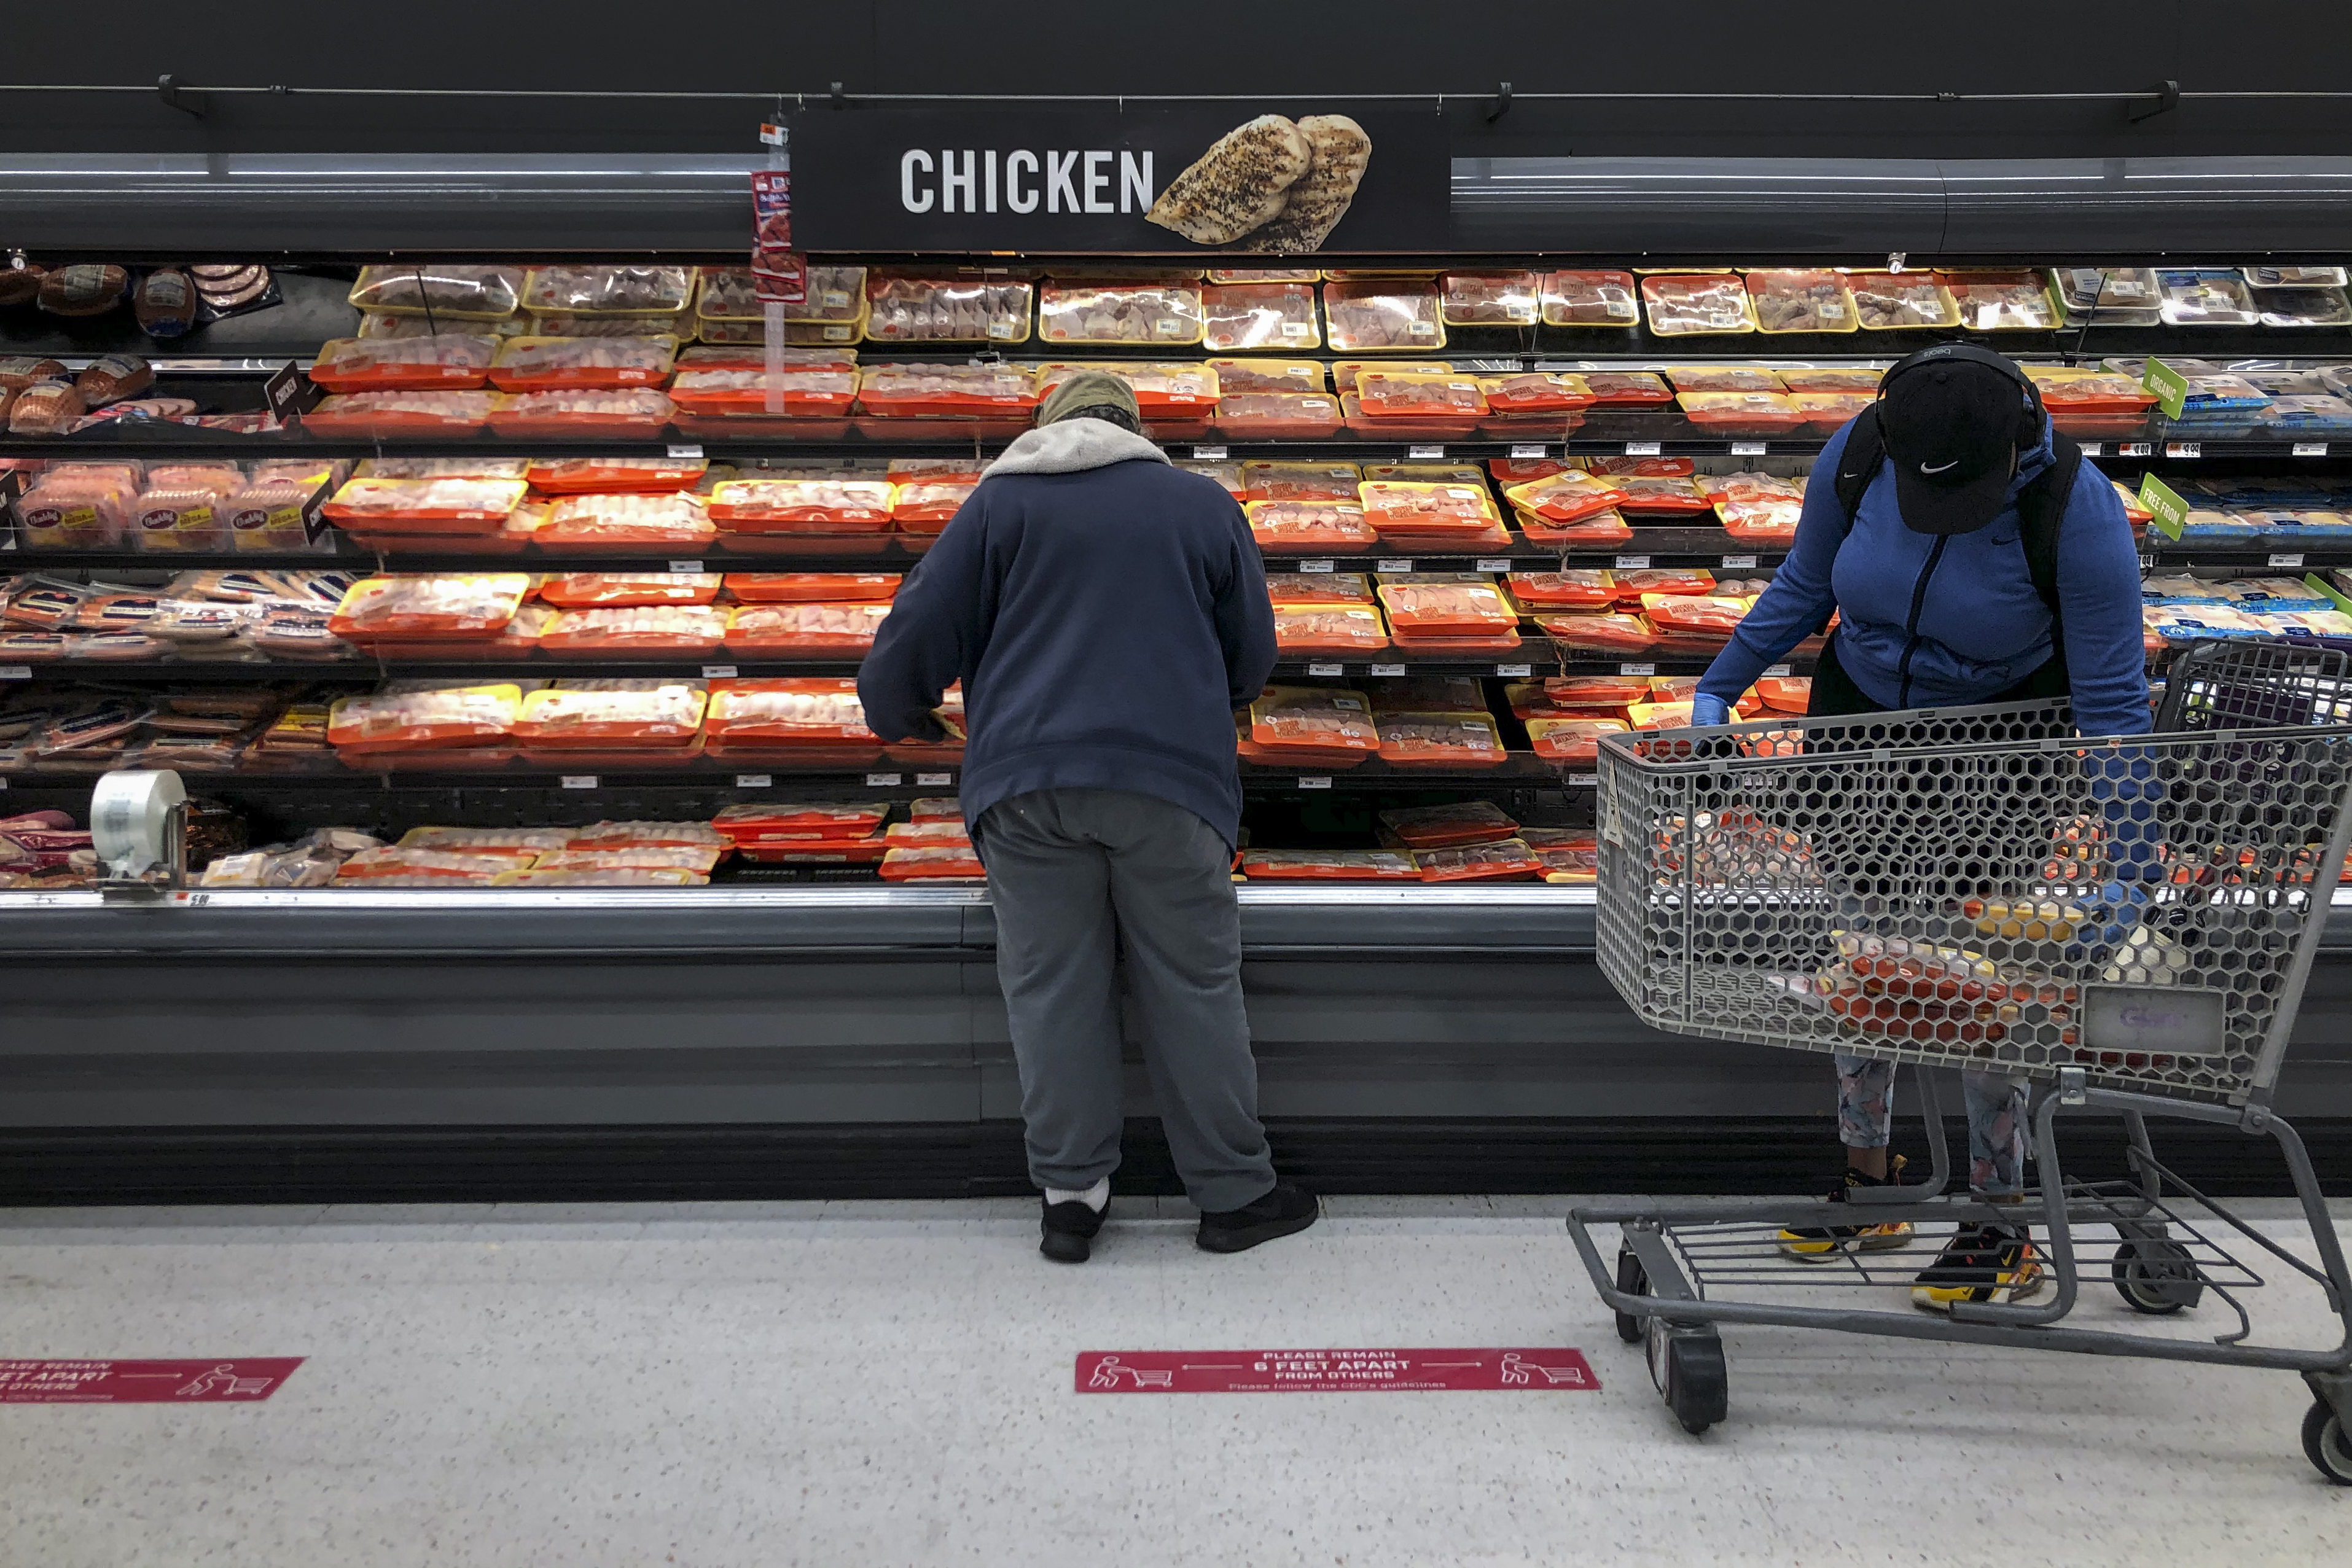 People Who Bought Chicken In The U.S. This Past Decade May Recieve Class-Action Payments